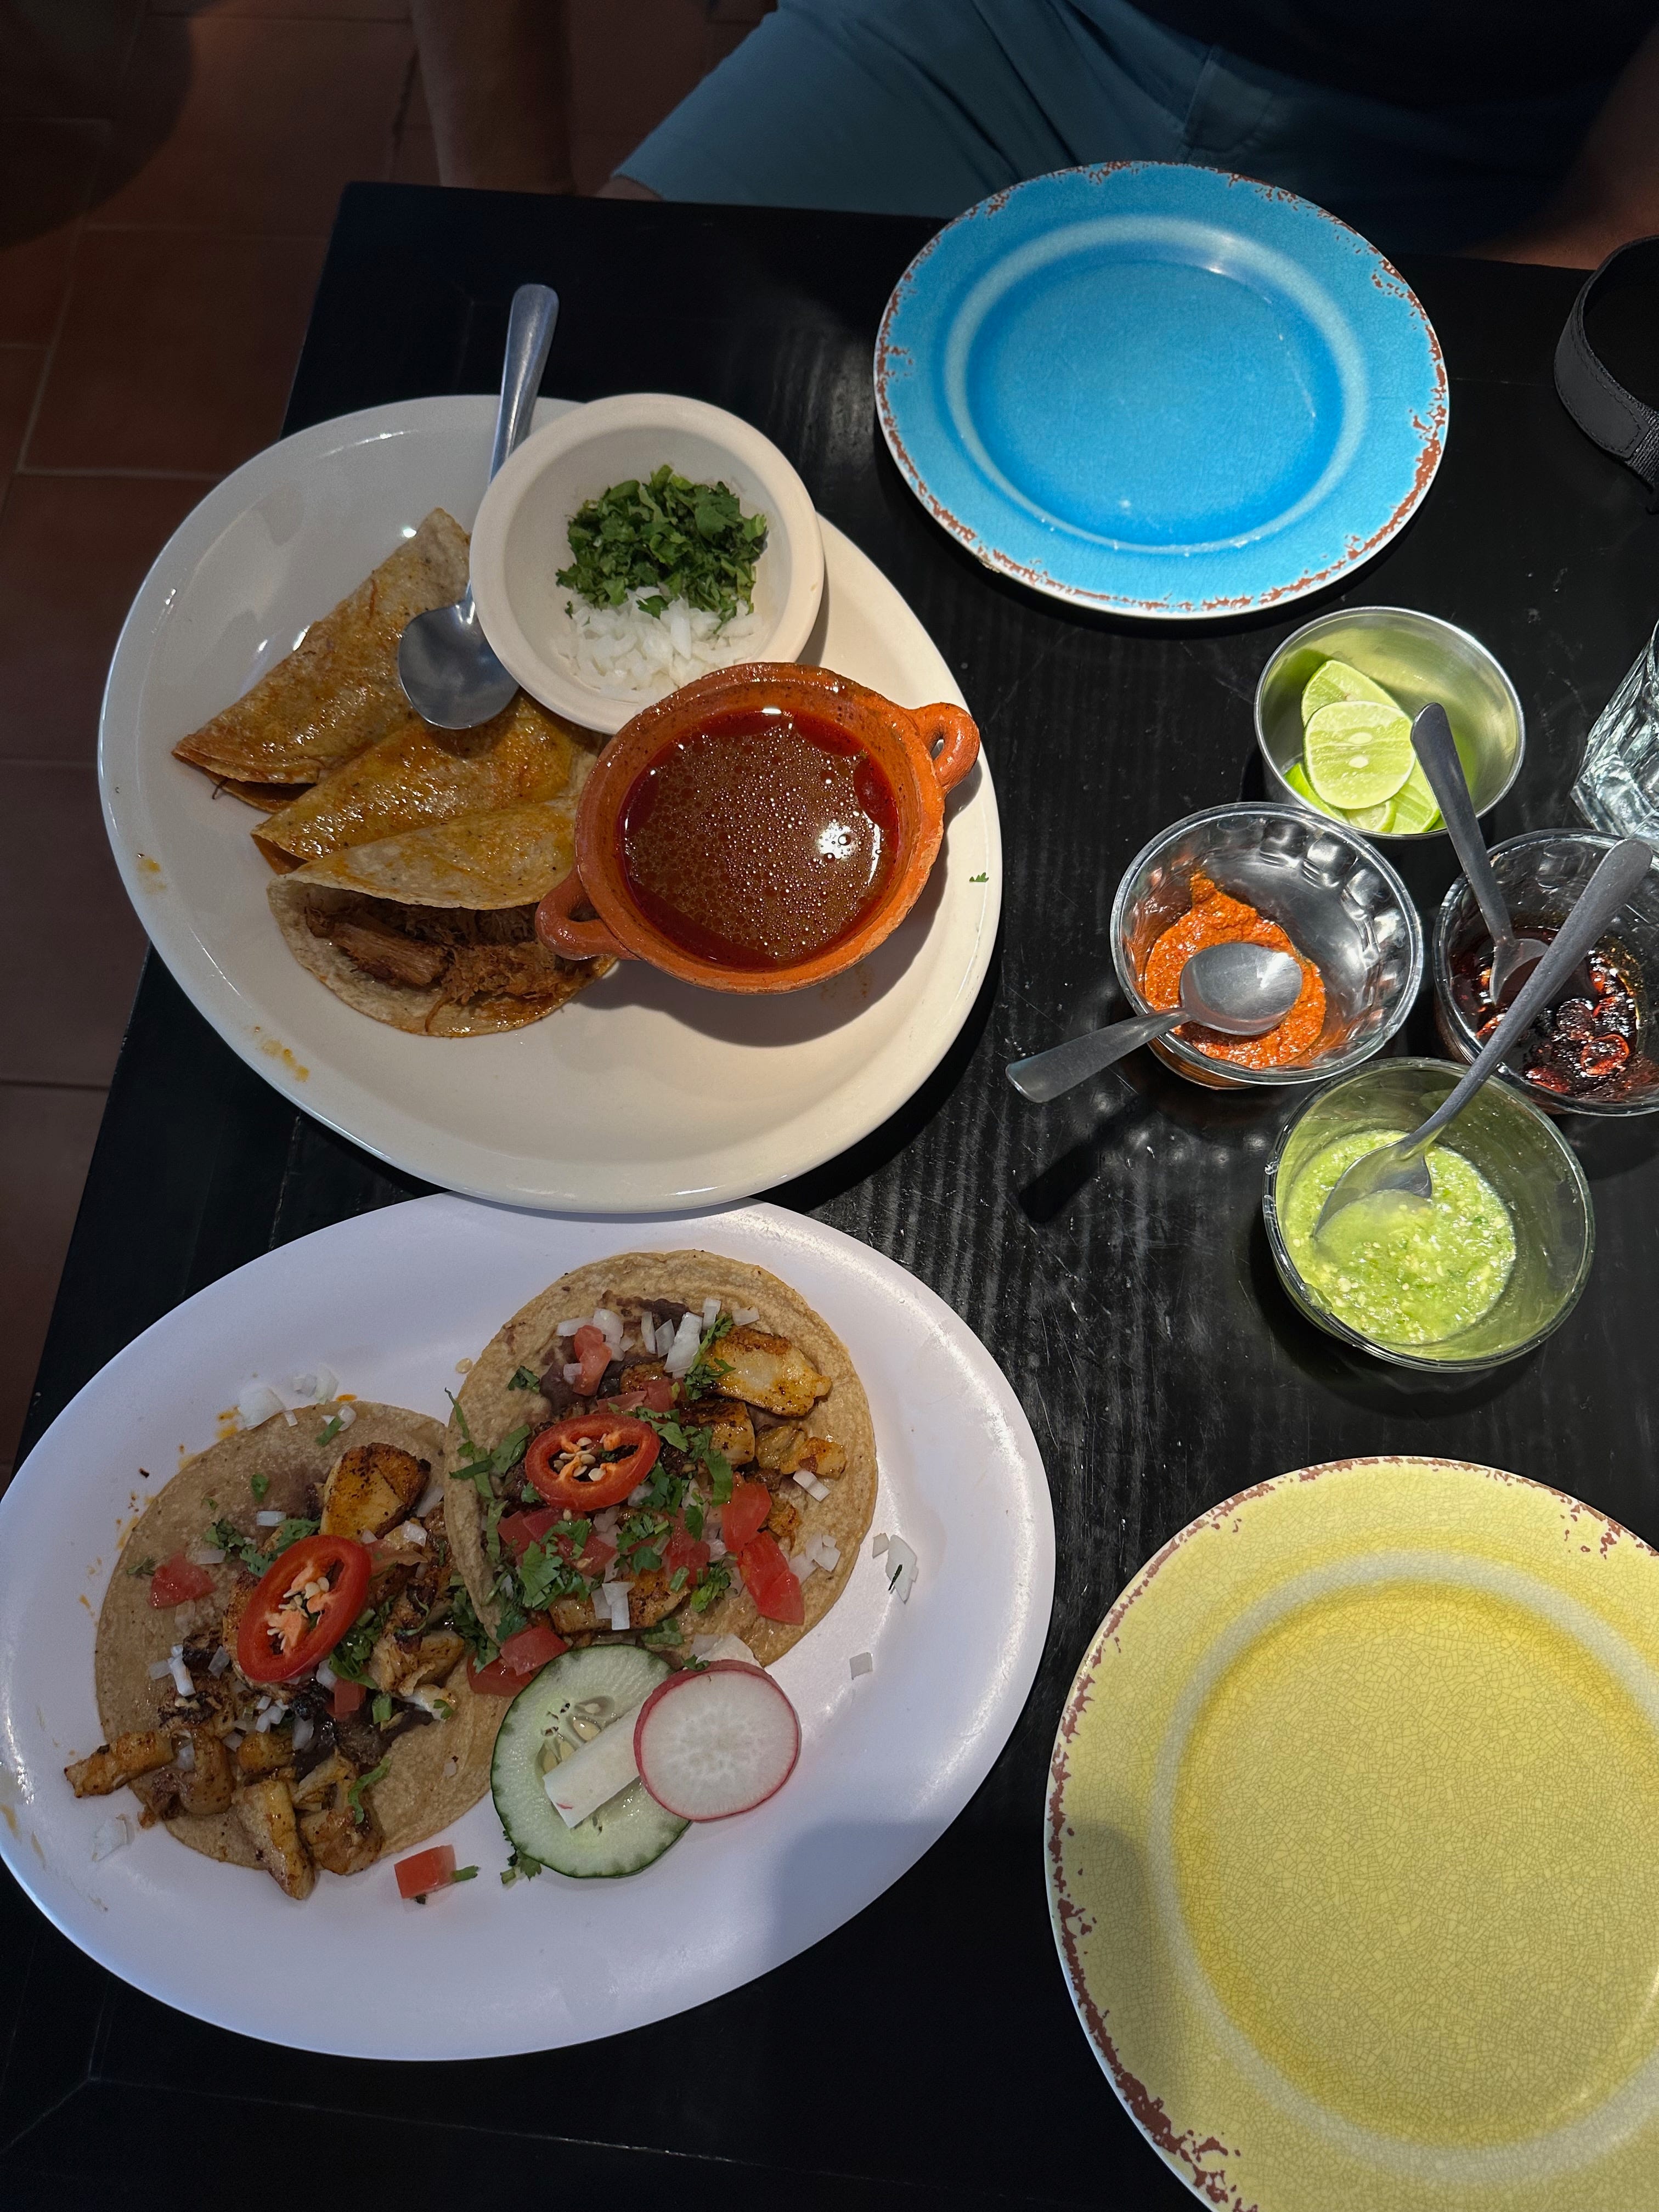 Travel #1 - Our Taco Journey - Hungry Soles